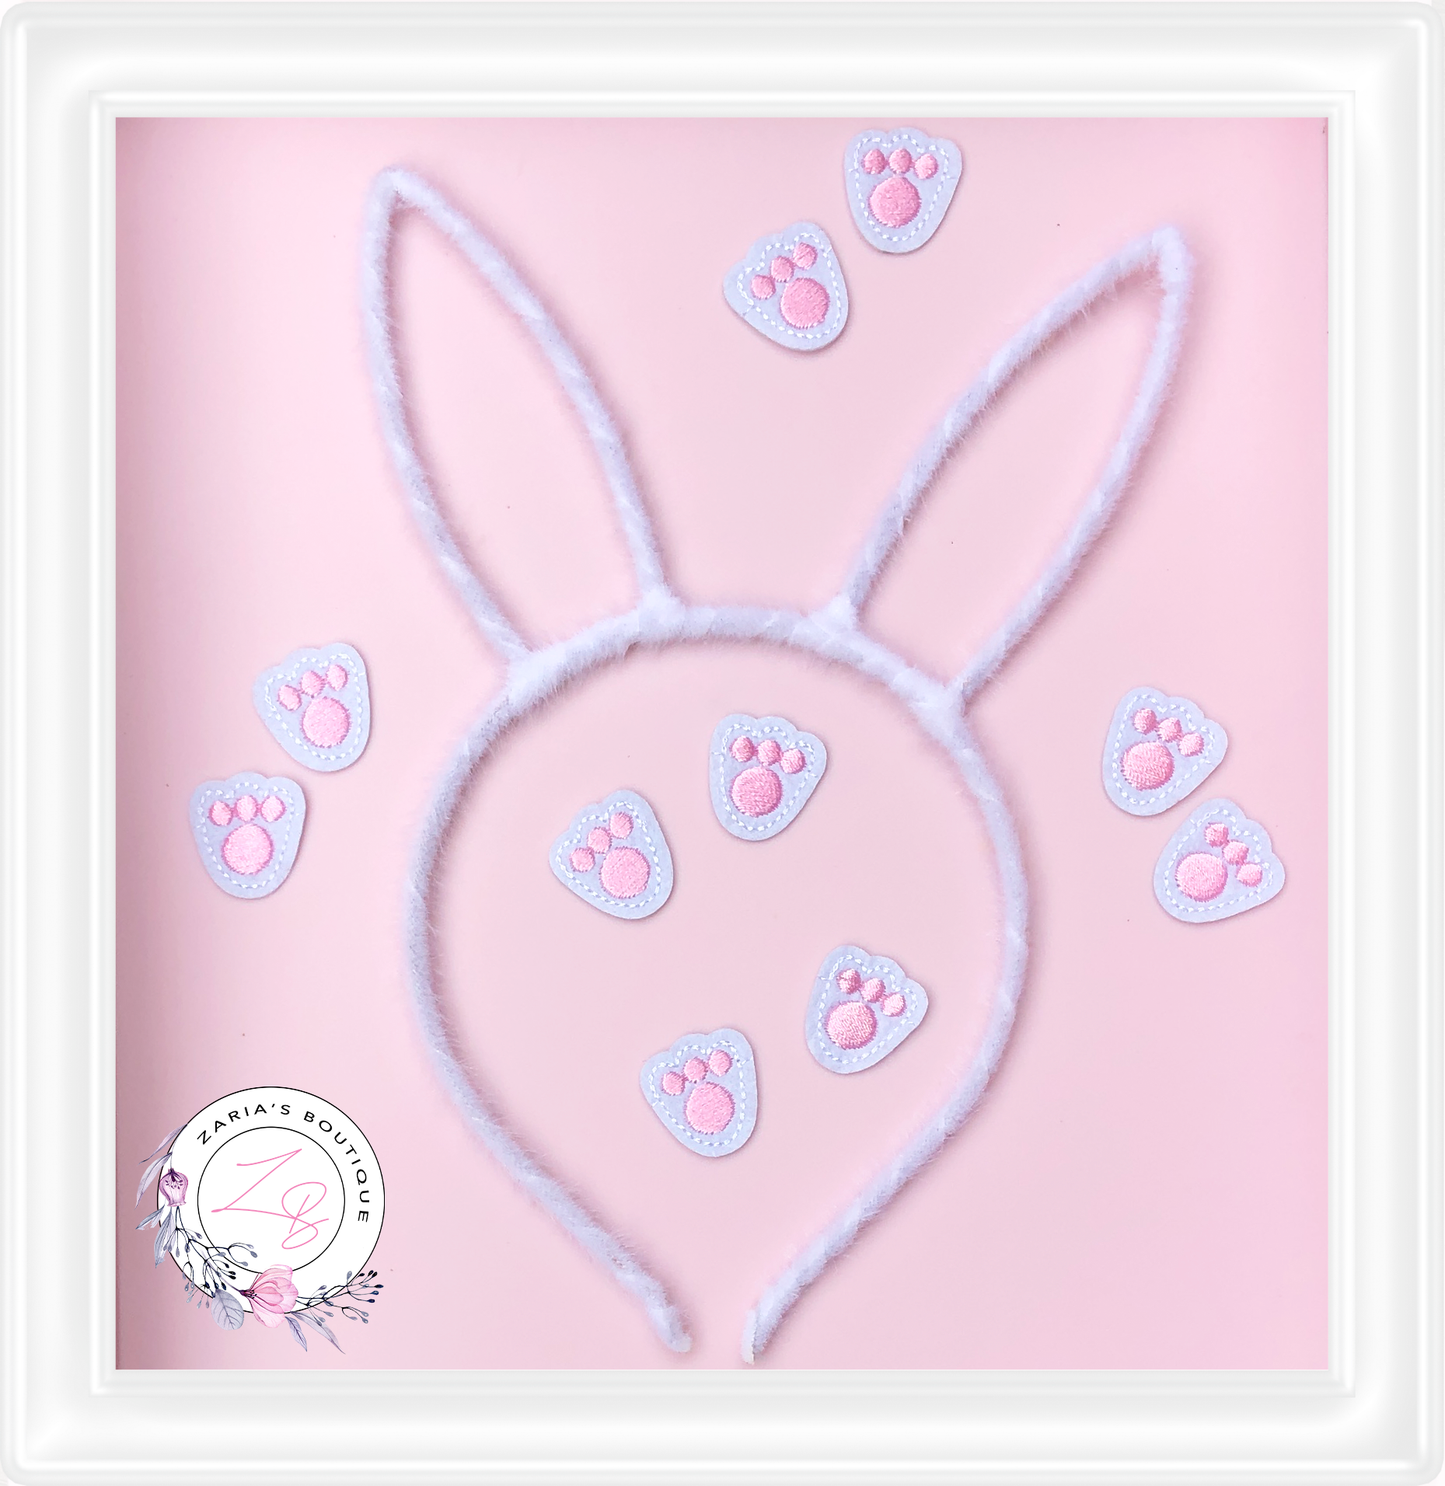 ⋅ Pink Bunny Toes ⋅ Add to Bows & Hair Clips ⋅ 5 Pairs ⋅